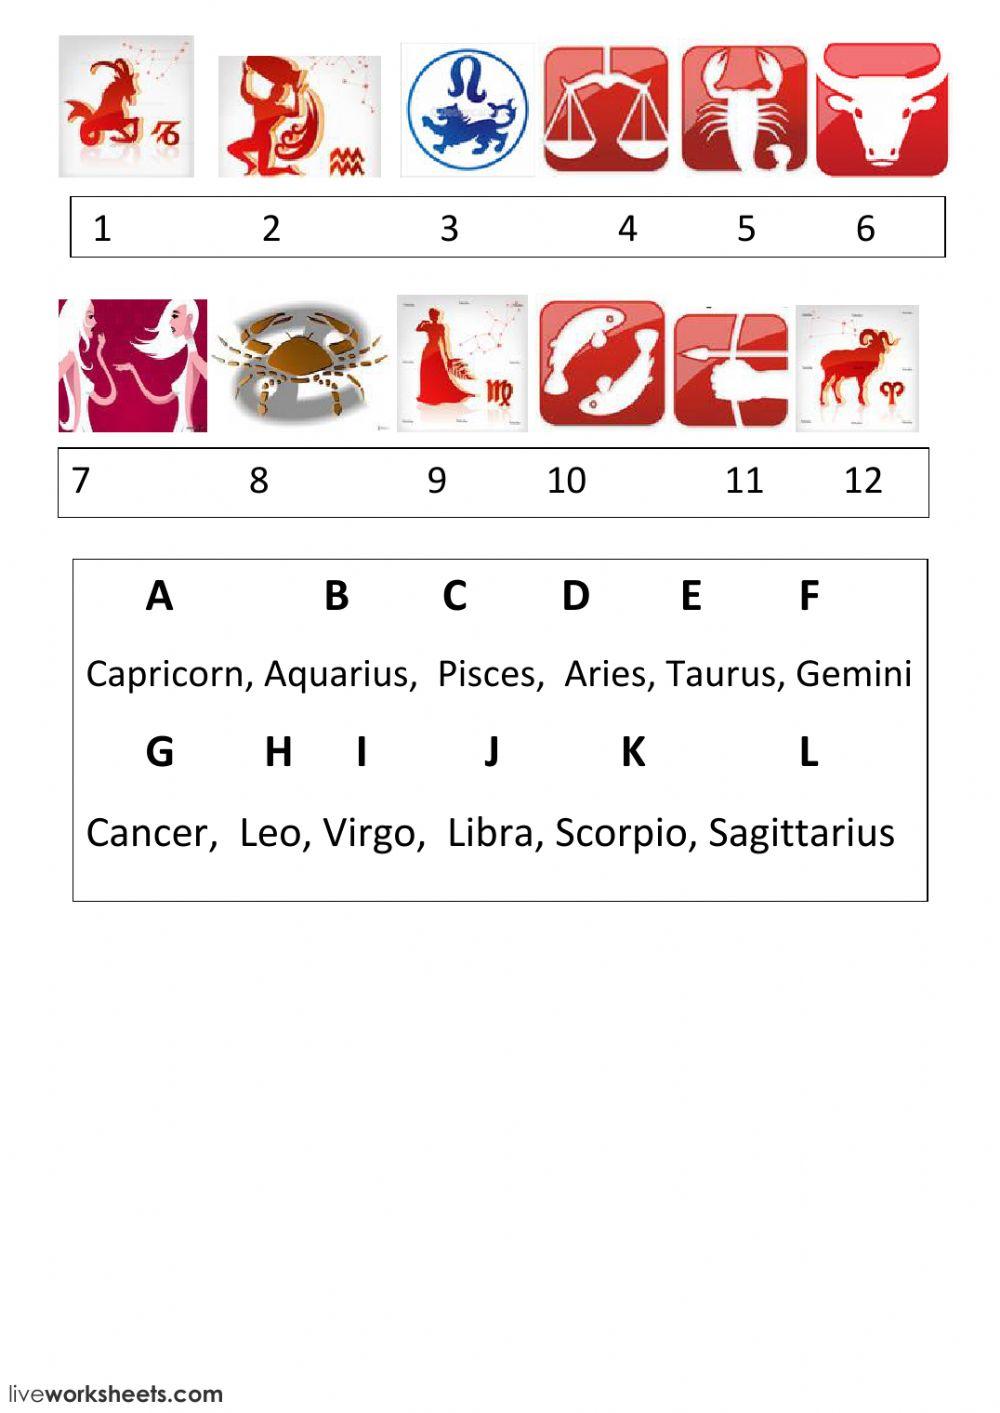 Match the sign and the word (Zodiak)